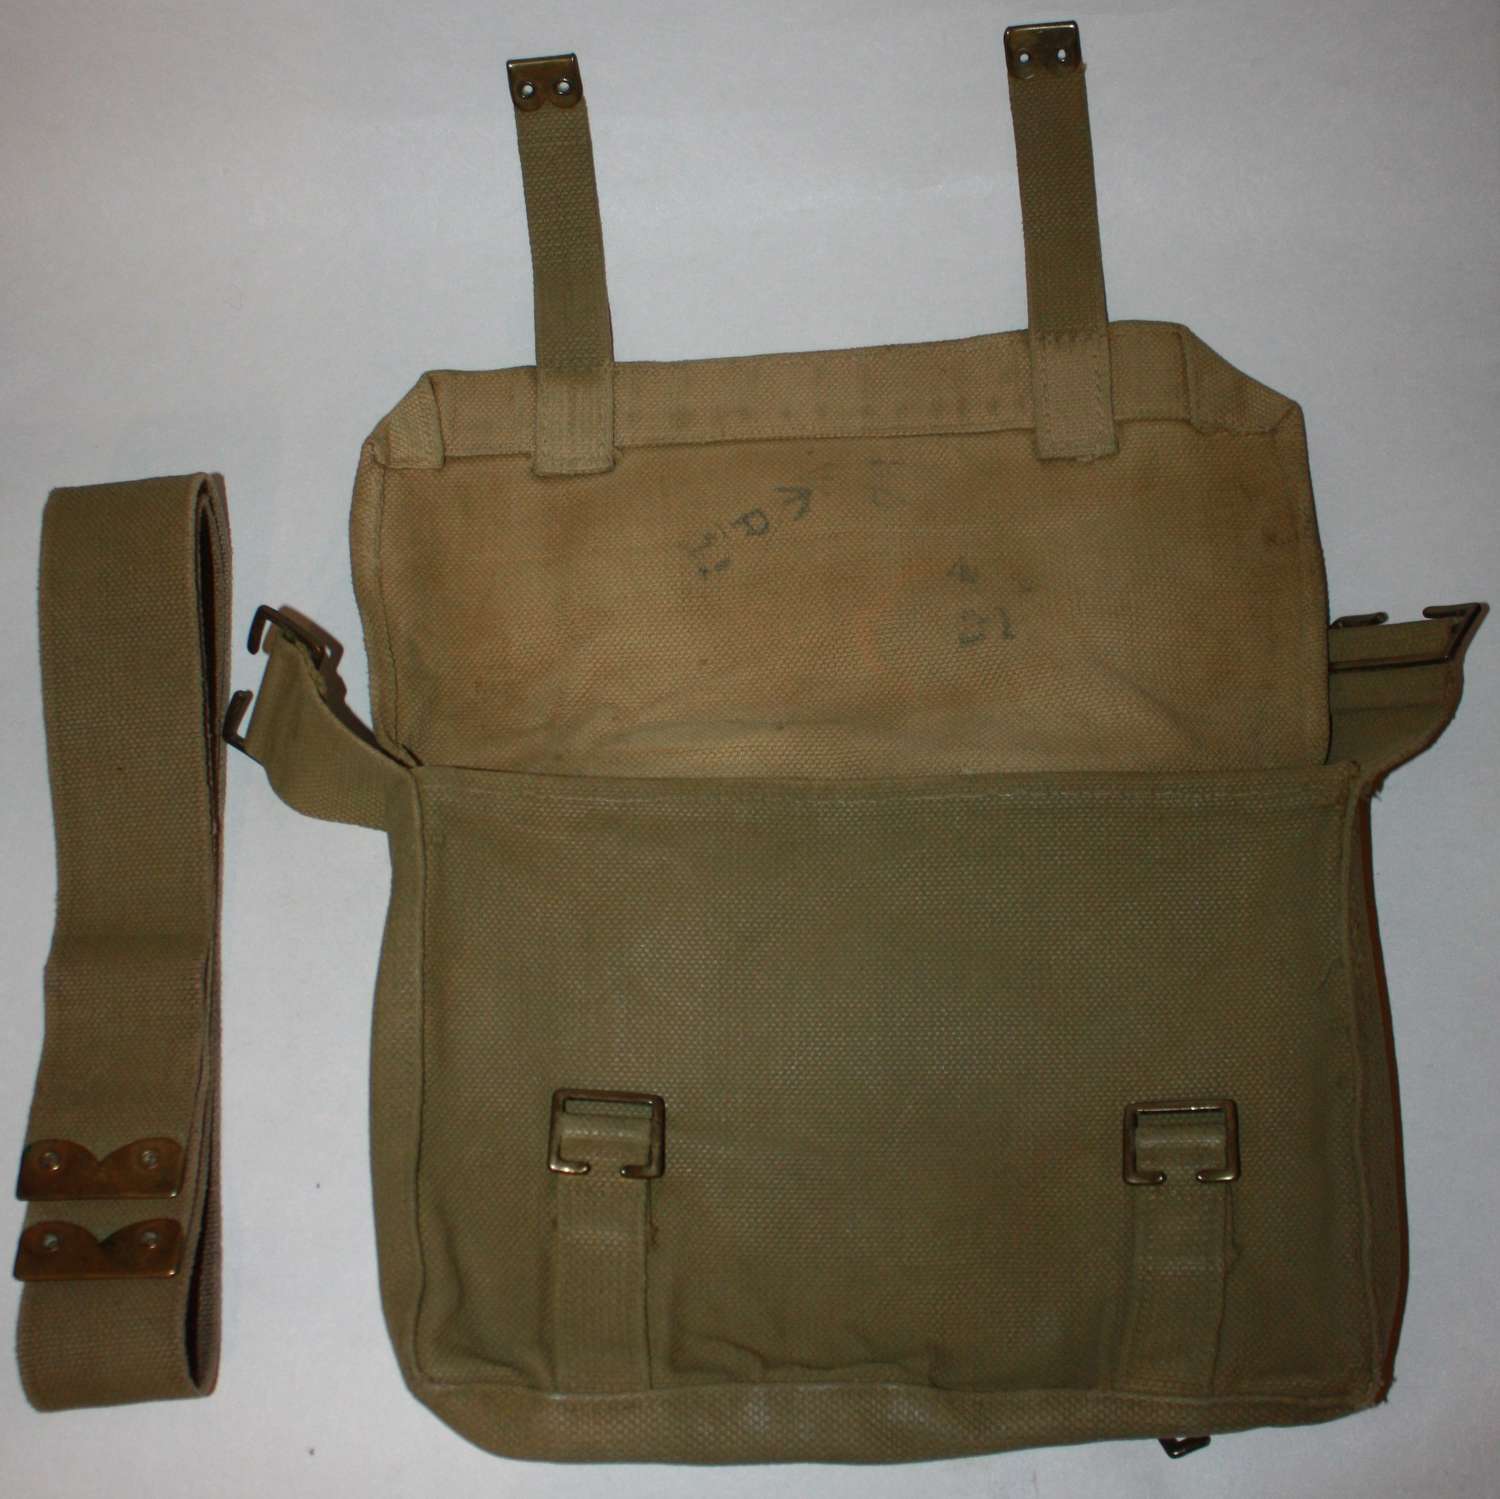 A WWI 08 PATTERN WEBBING SMALL PACK REFURED IN OR ARFTER 1925